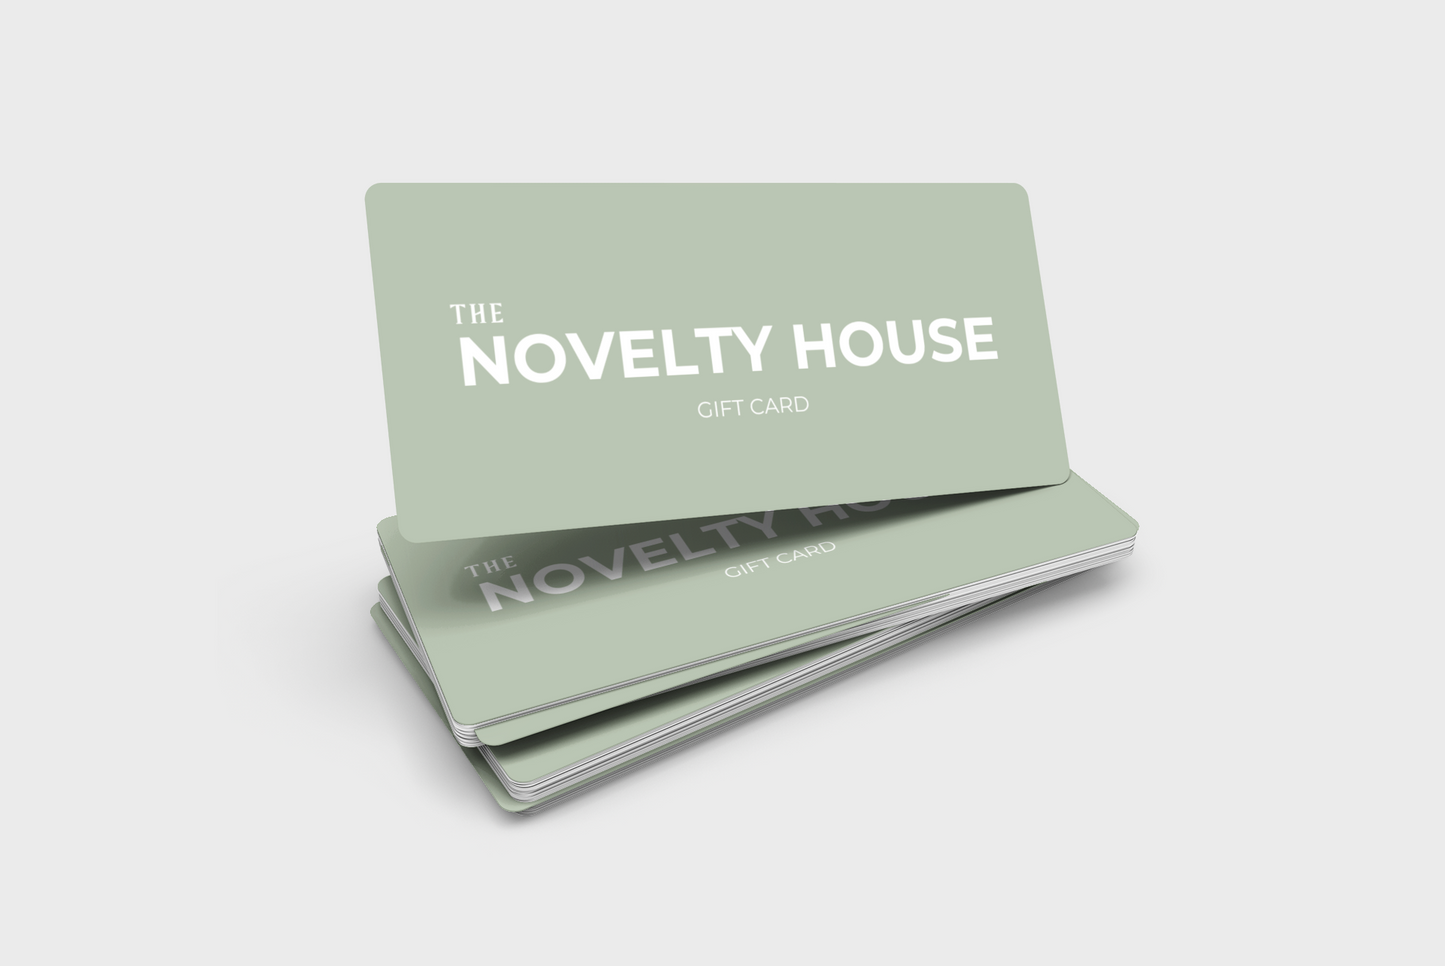 The Novelty House Gift Card